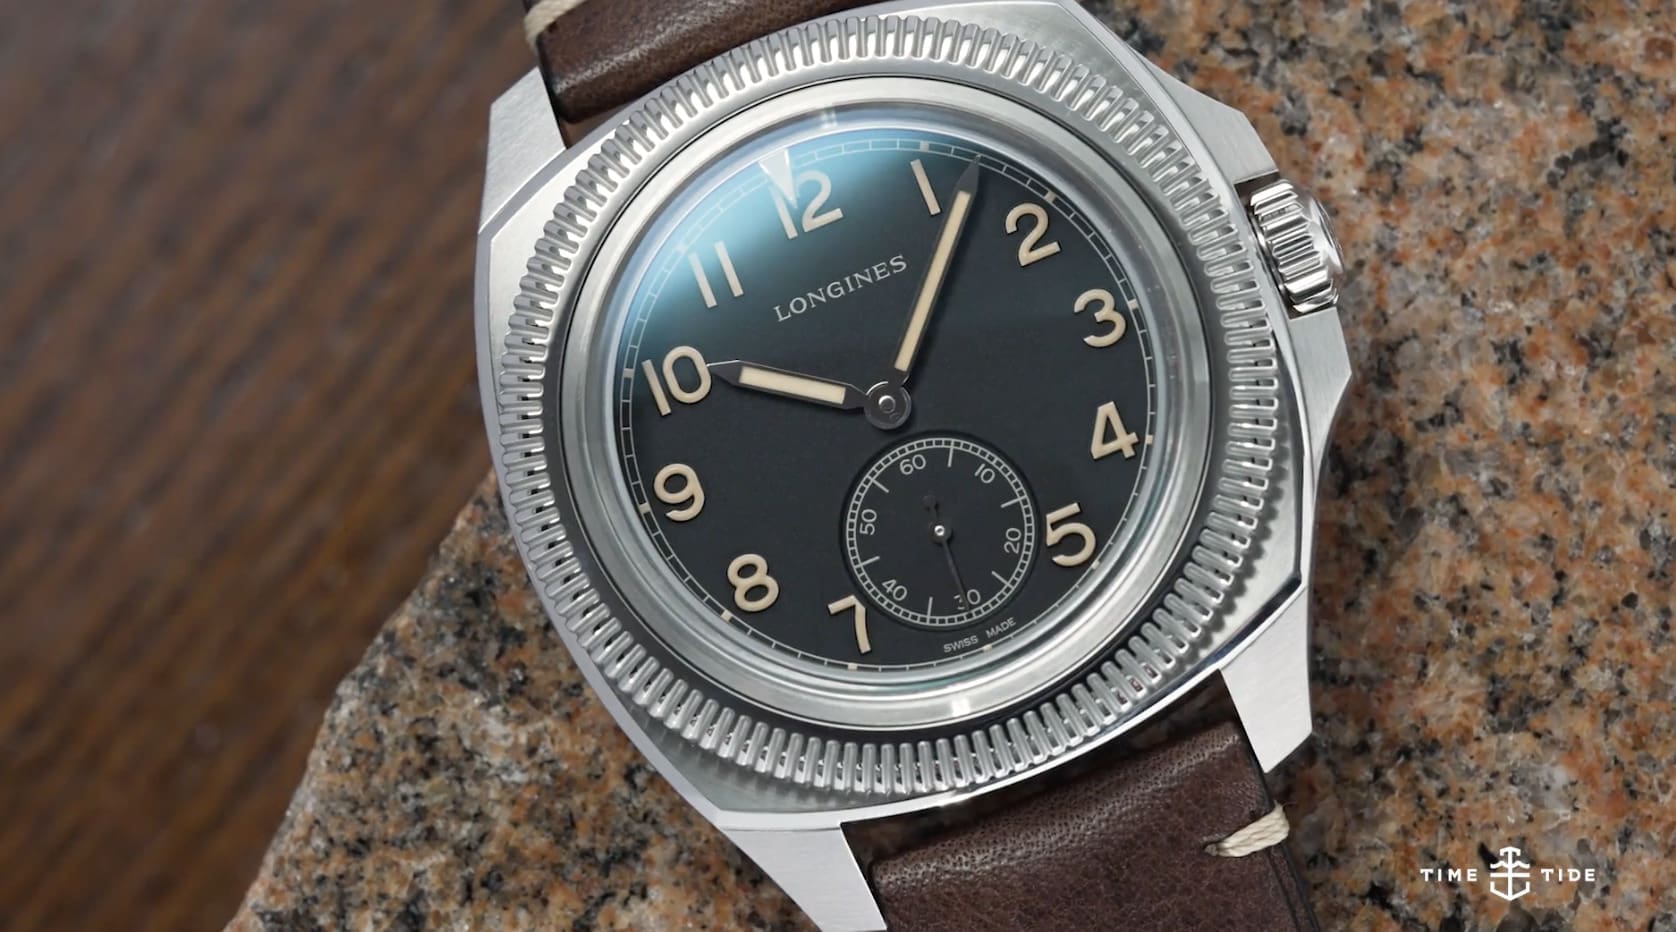 The Longines Pilot Majetek is a wrist-mounted flight instrument with a storied past